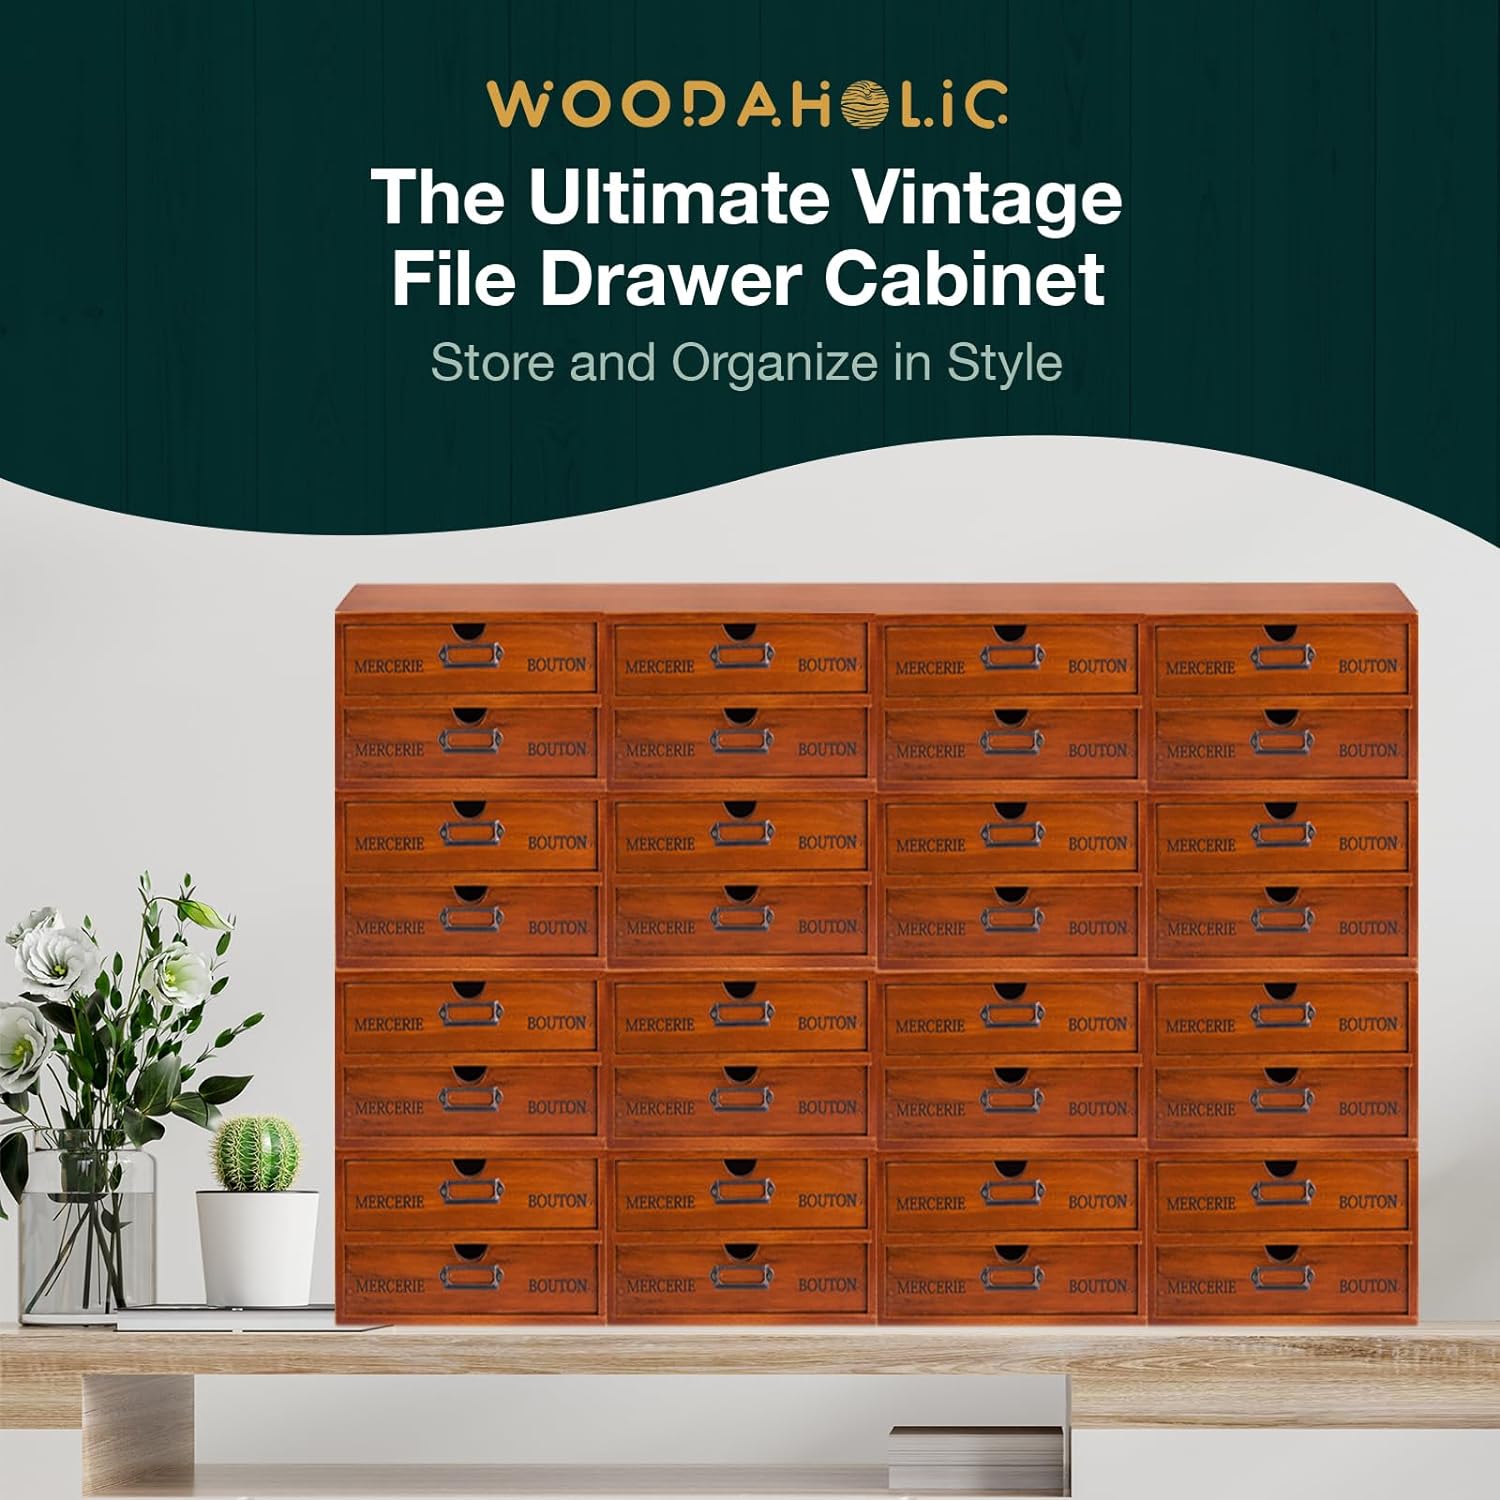 Load image into Gallery viewer, 48-Drawer Wooden Storage Box-12*4-Drawer Desktop Organizer Units with Label Holders